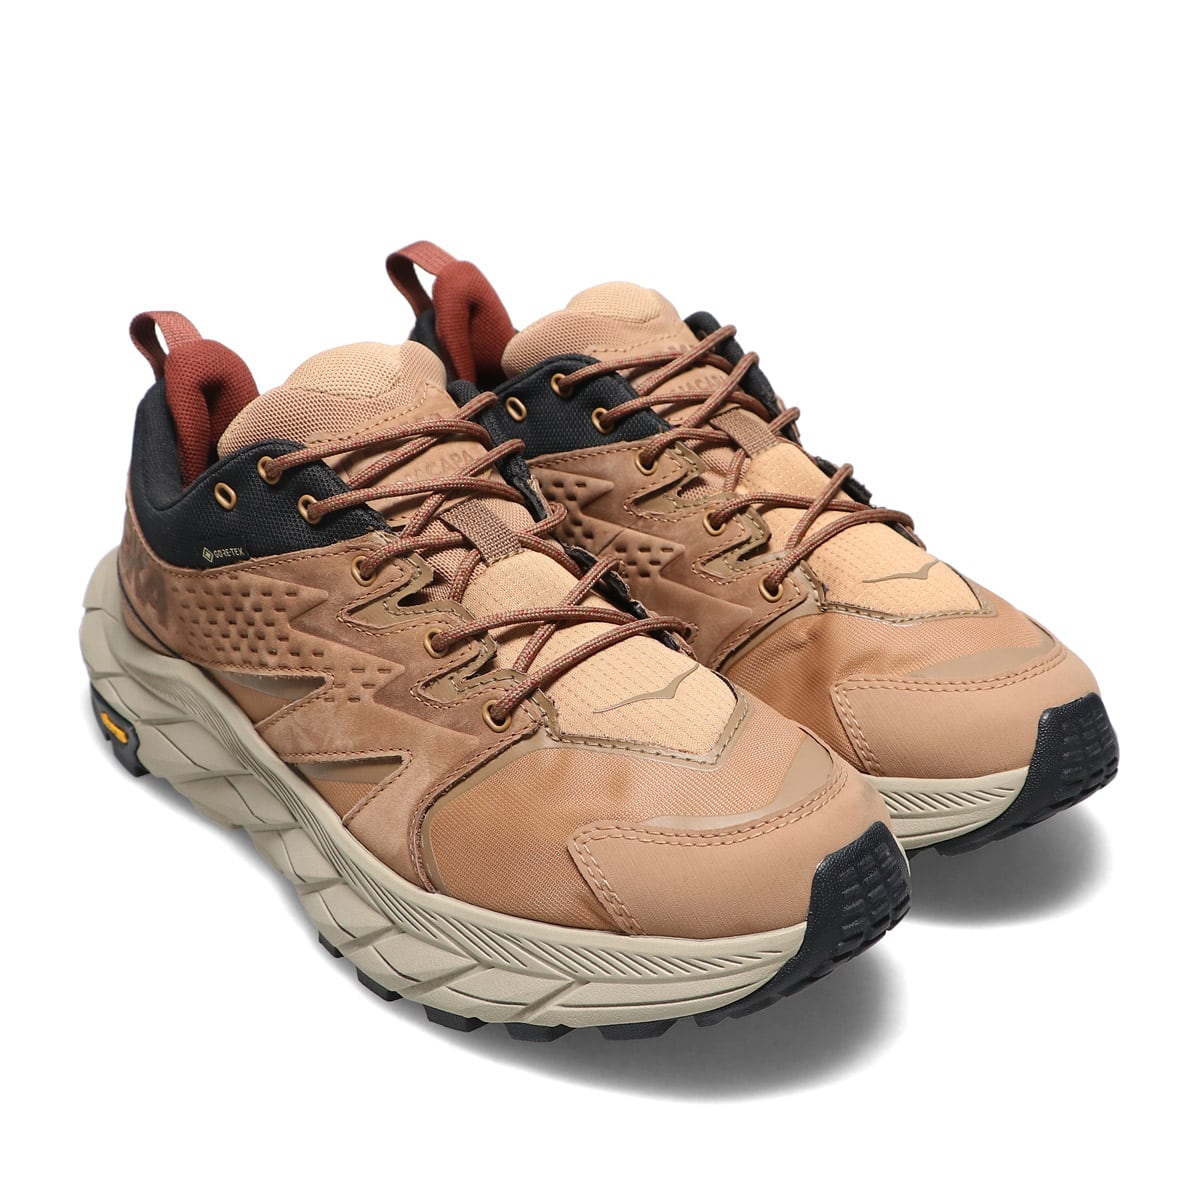 OUTLET 包装 即日発送 代引無料 HOKA ONE ONE ANACAPA LOW GTX 27.5cm ...